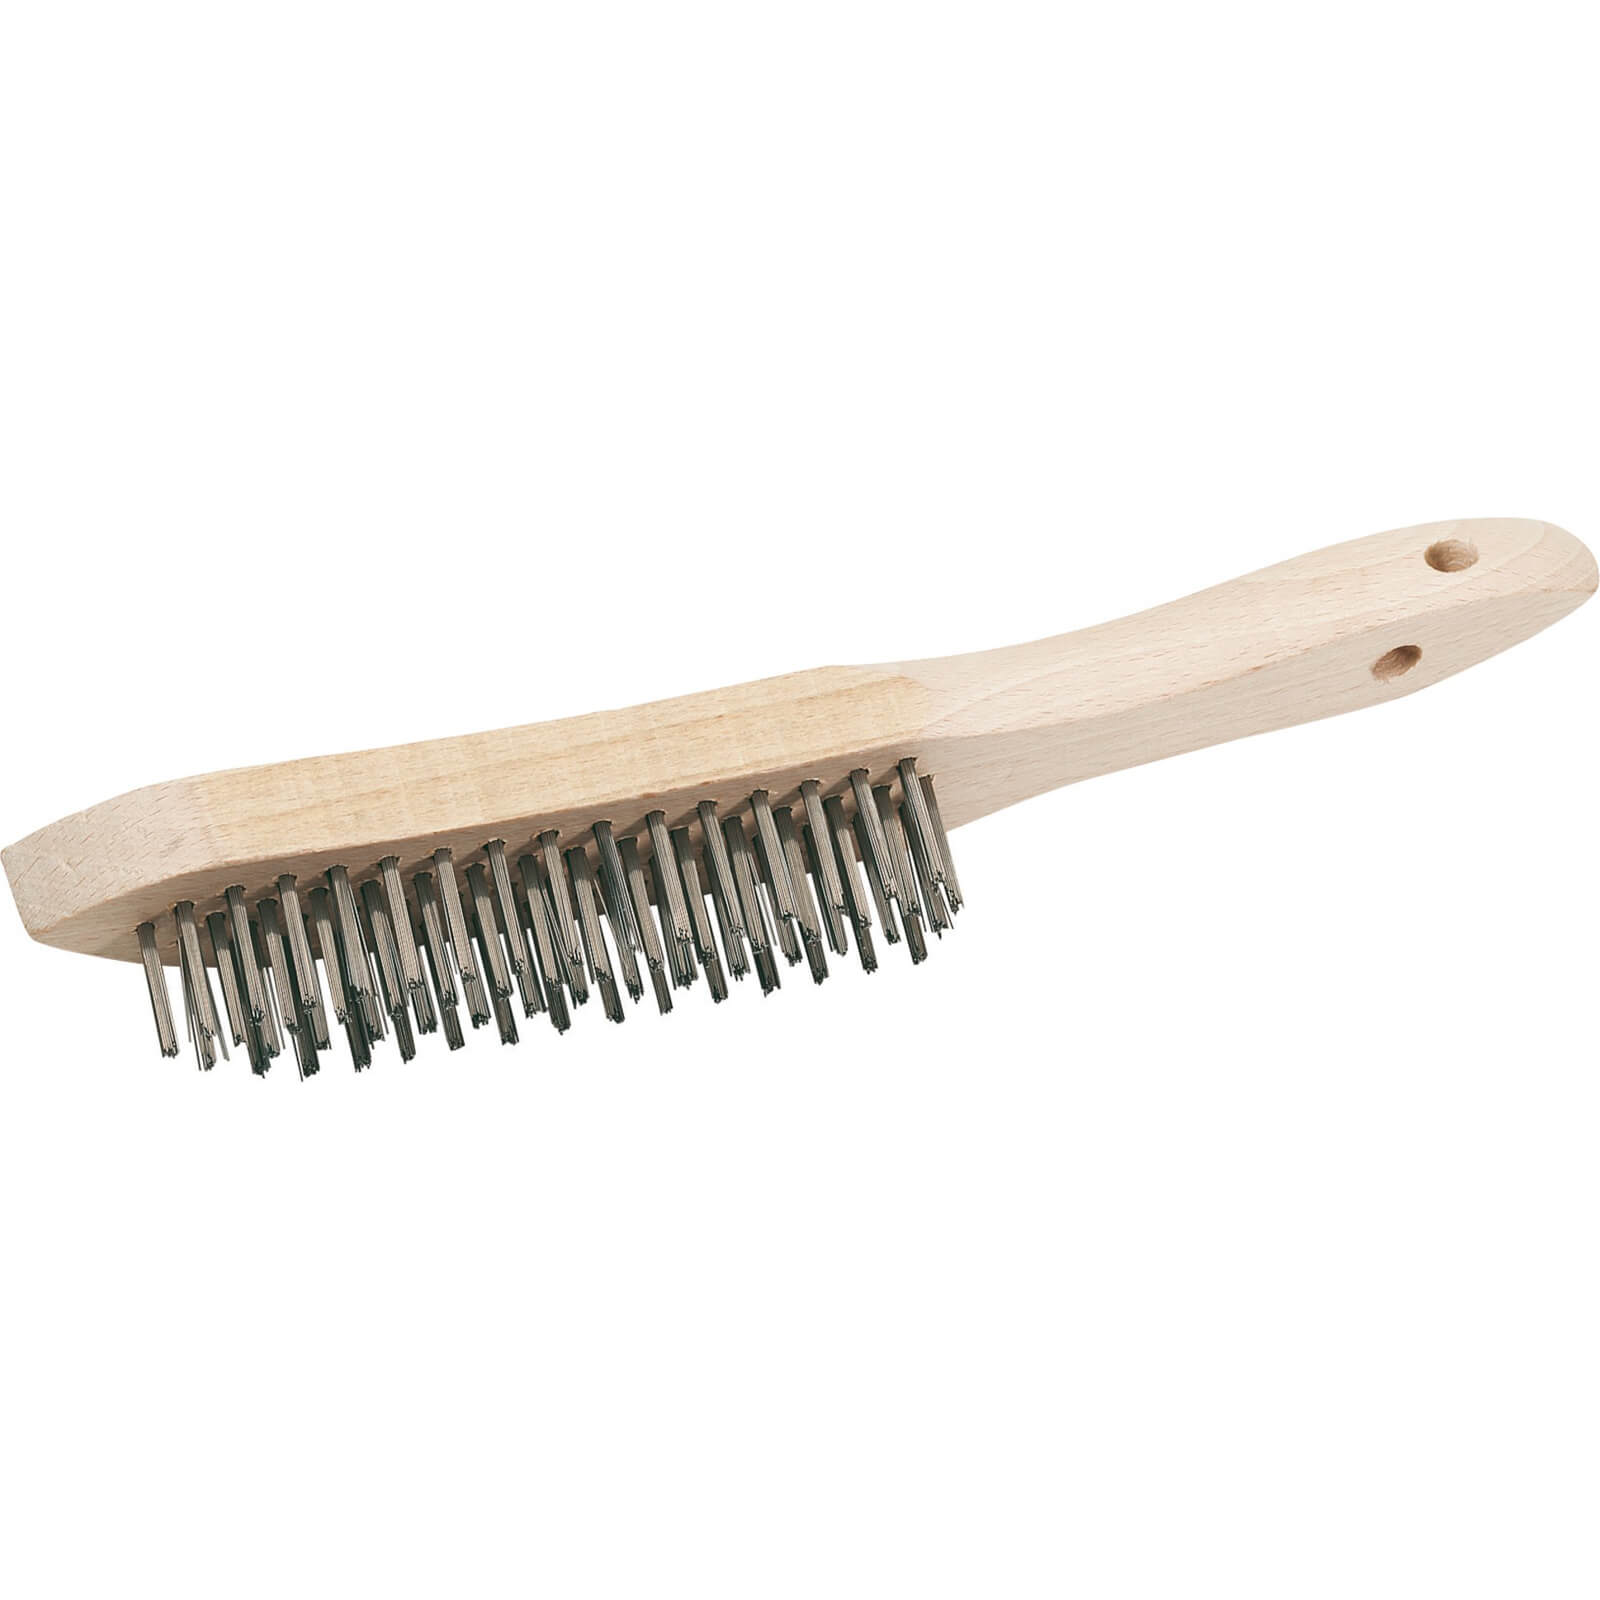 Image of Draper Stainless Steel Scratch Wire Brush 4 Rows